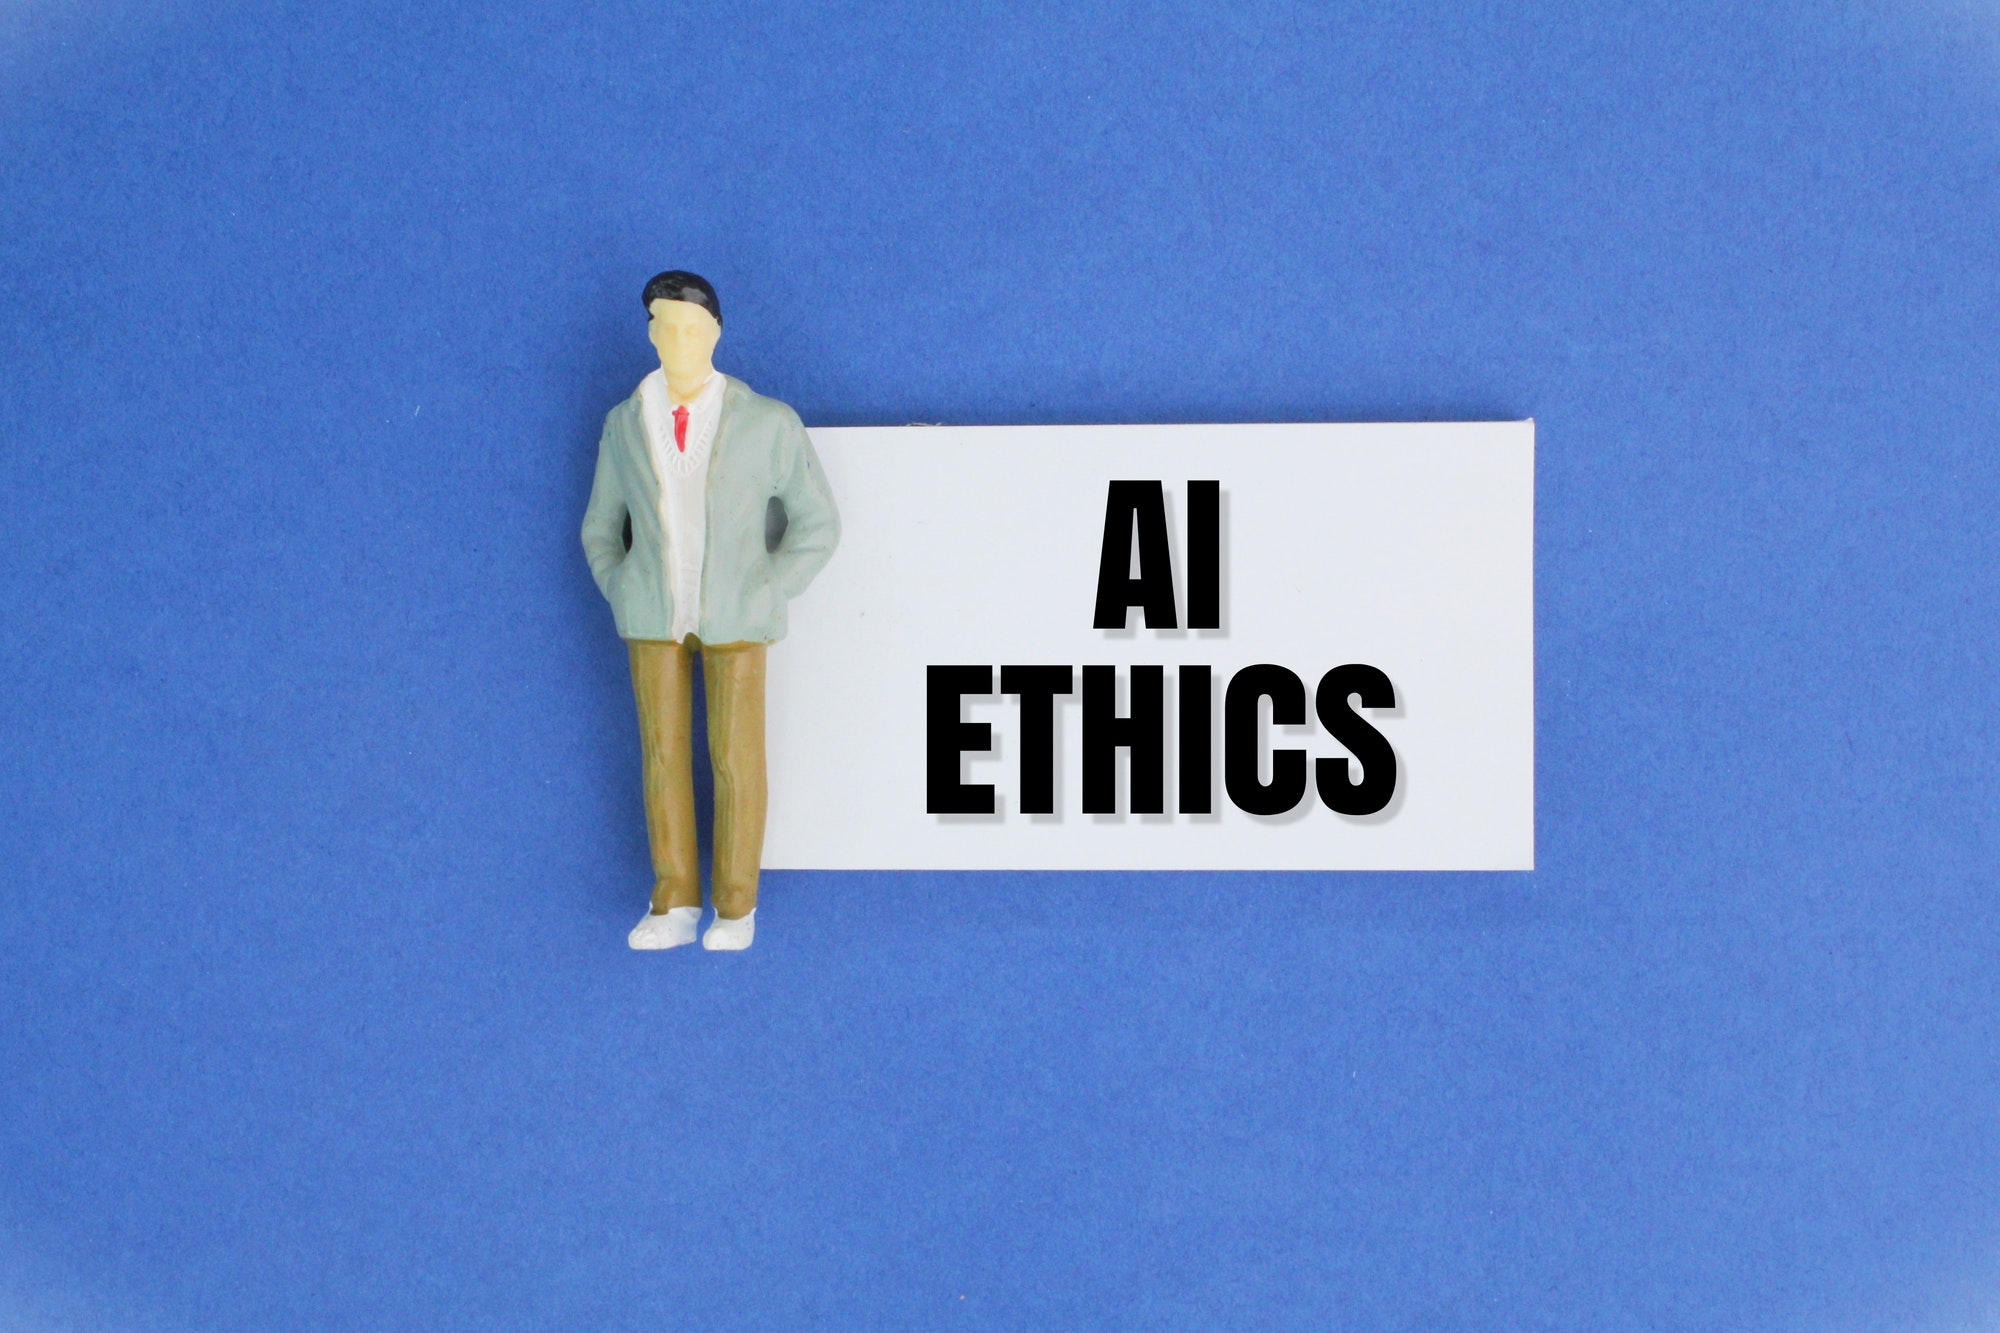 miniature people and paper with the word AI ETHICS. Ethical concepts for artificial intelligence